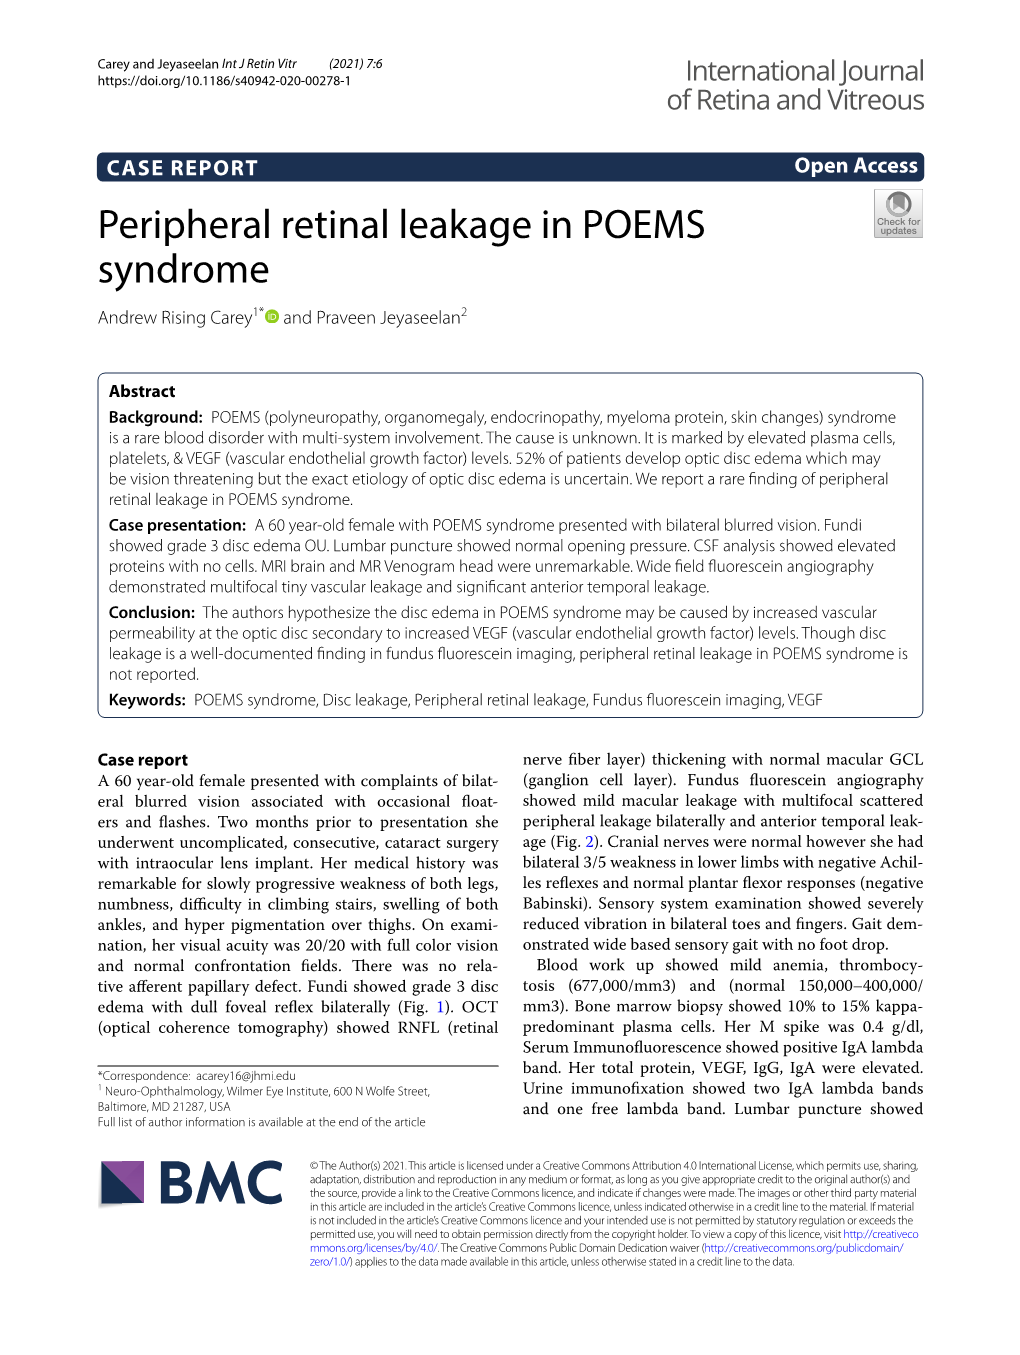 Peripheral Retinal Leakage in POEMS Syndrome Andrew Rising Carey1* and Praveen Jeyaseelan2